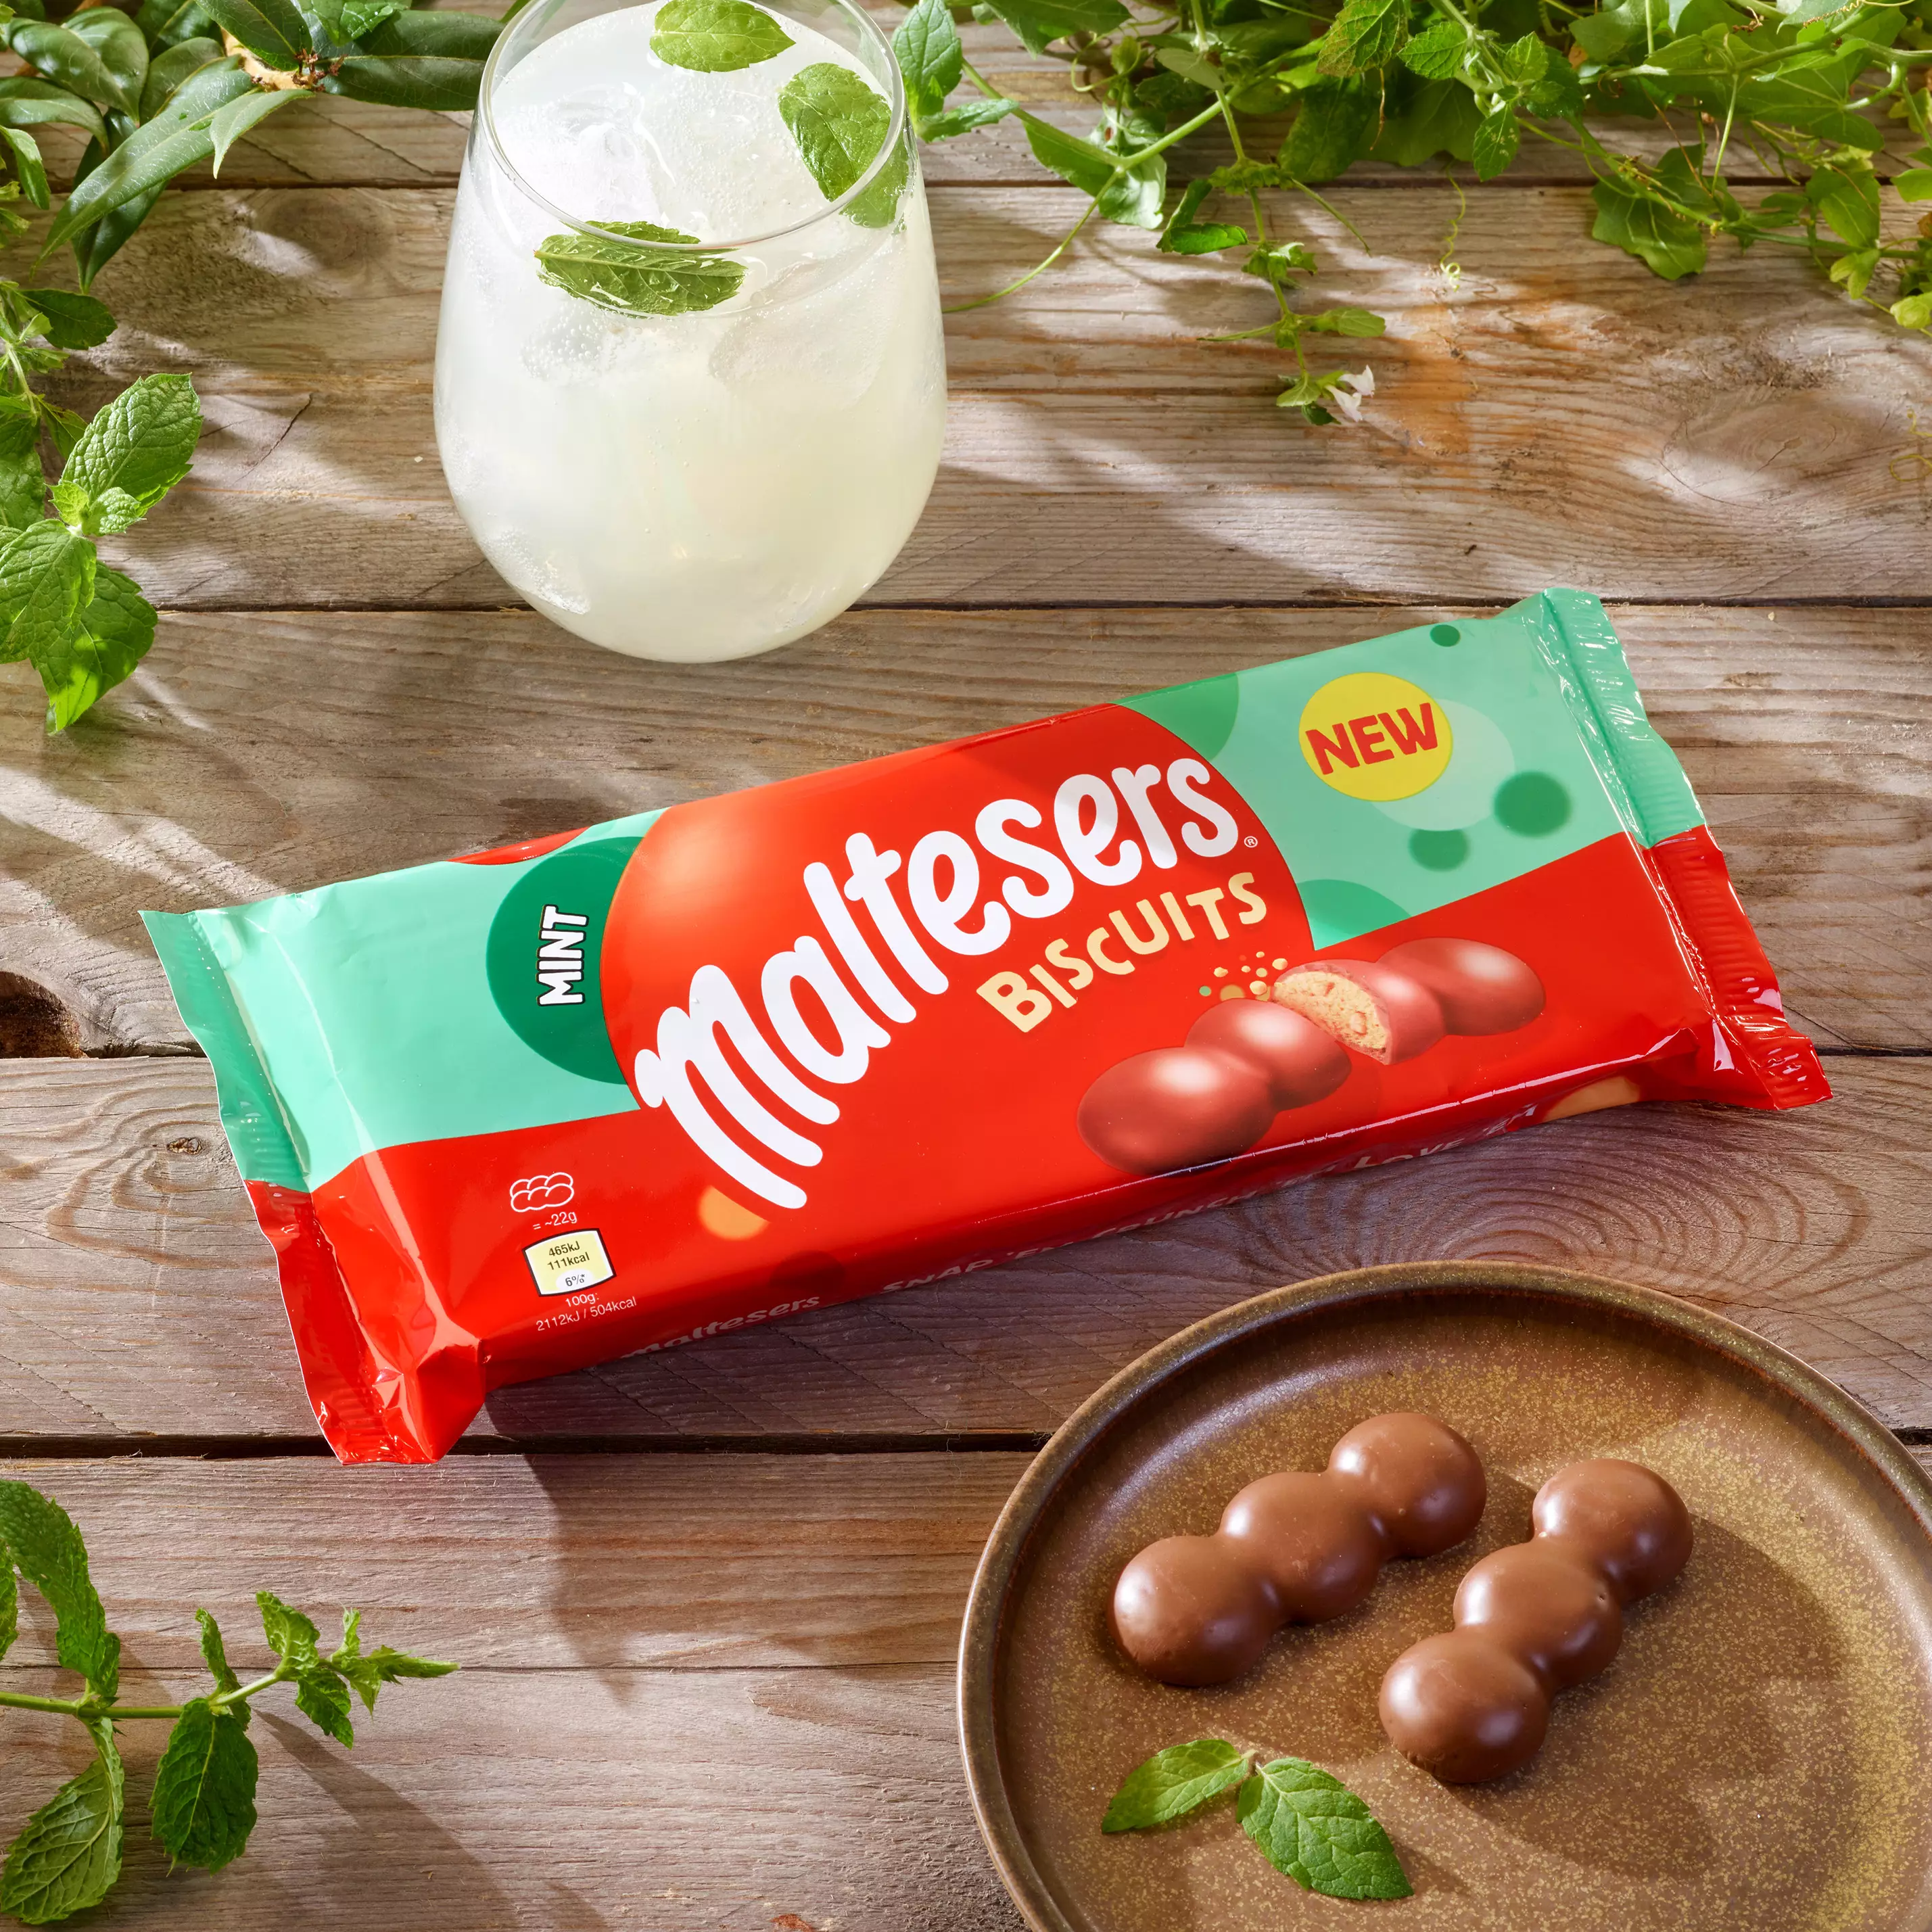 Each biscuit has three light seriously minty, malty bobbles, smothered in smooth milk chocolate (